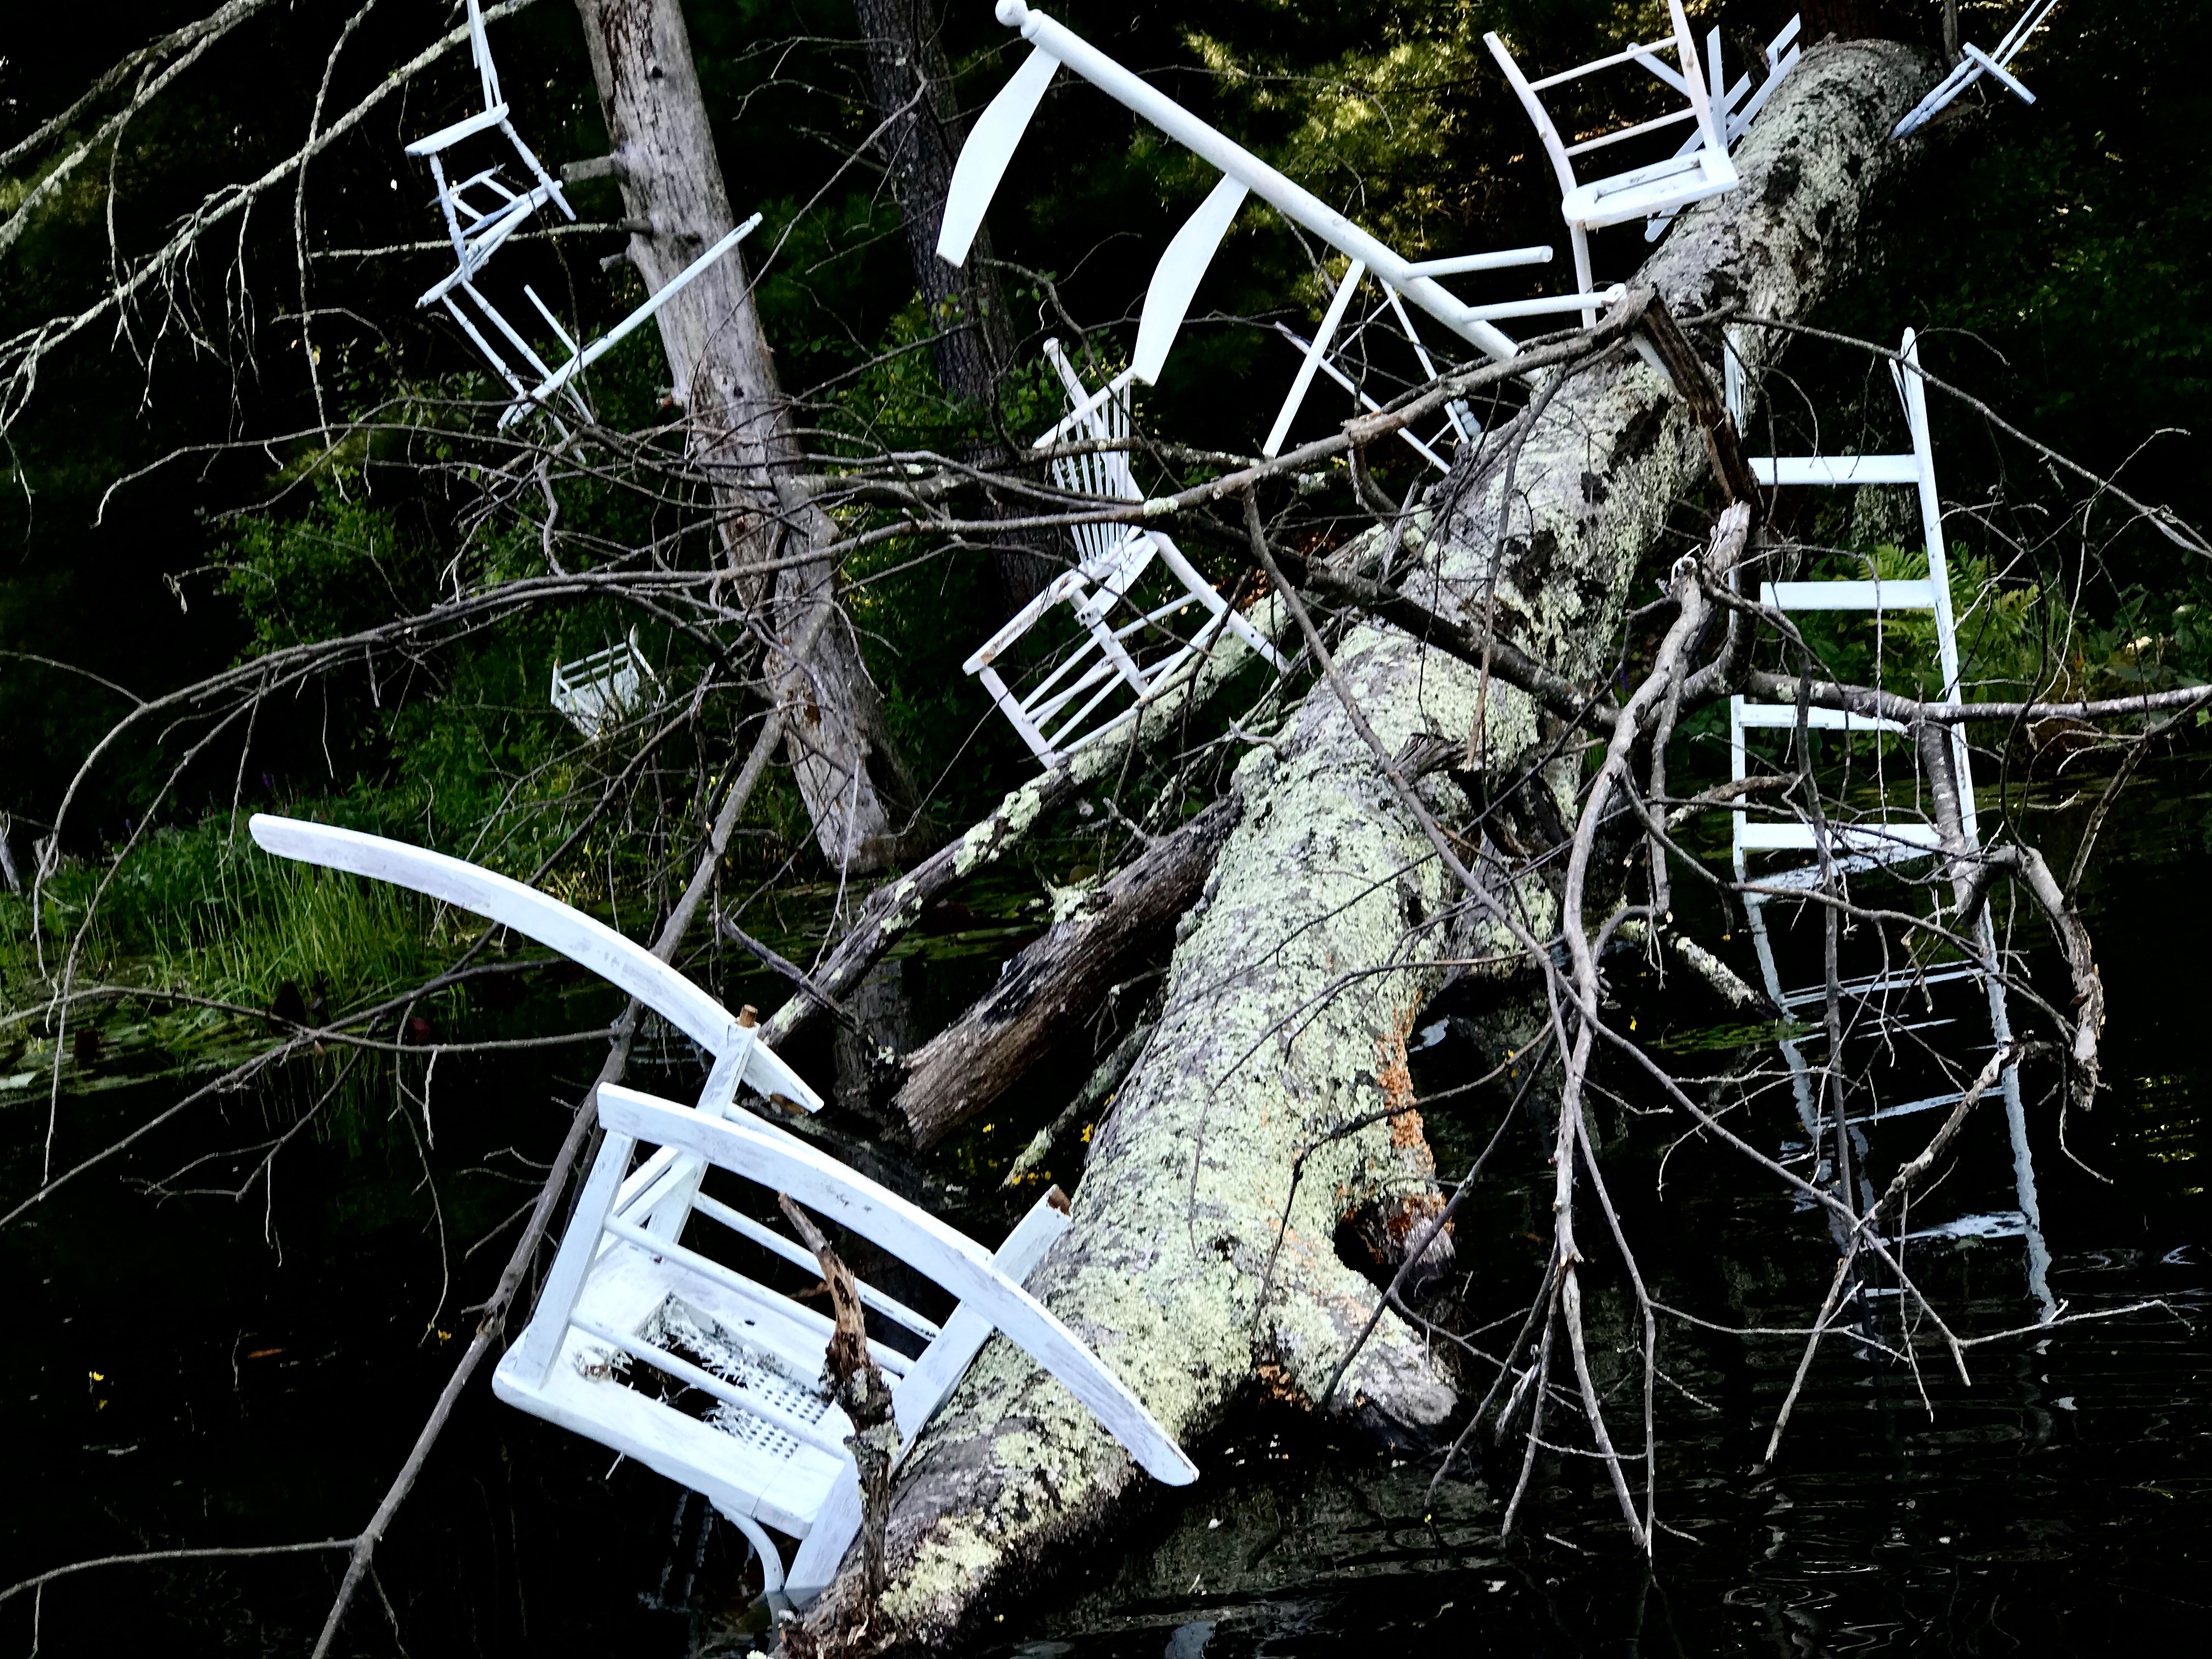 Photograph revealing a detail of 'Metamorphic Reflections' installation by artist Caroline Coolidge. The focus is on the tree trunk at the center, with numerous branches protruding from the fallen tree. White-painted chairs and various wooden objects, partly disassembled, emerge from the tree.